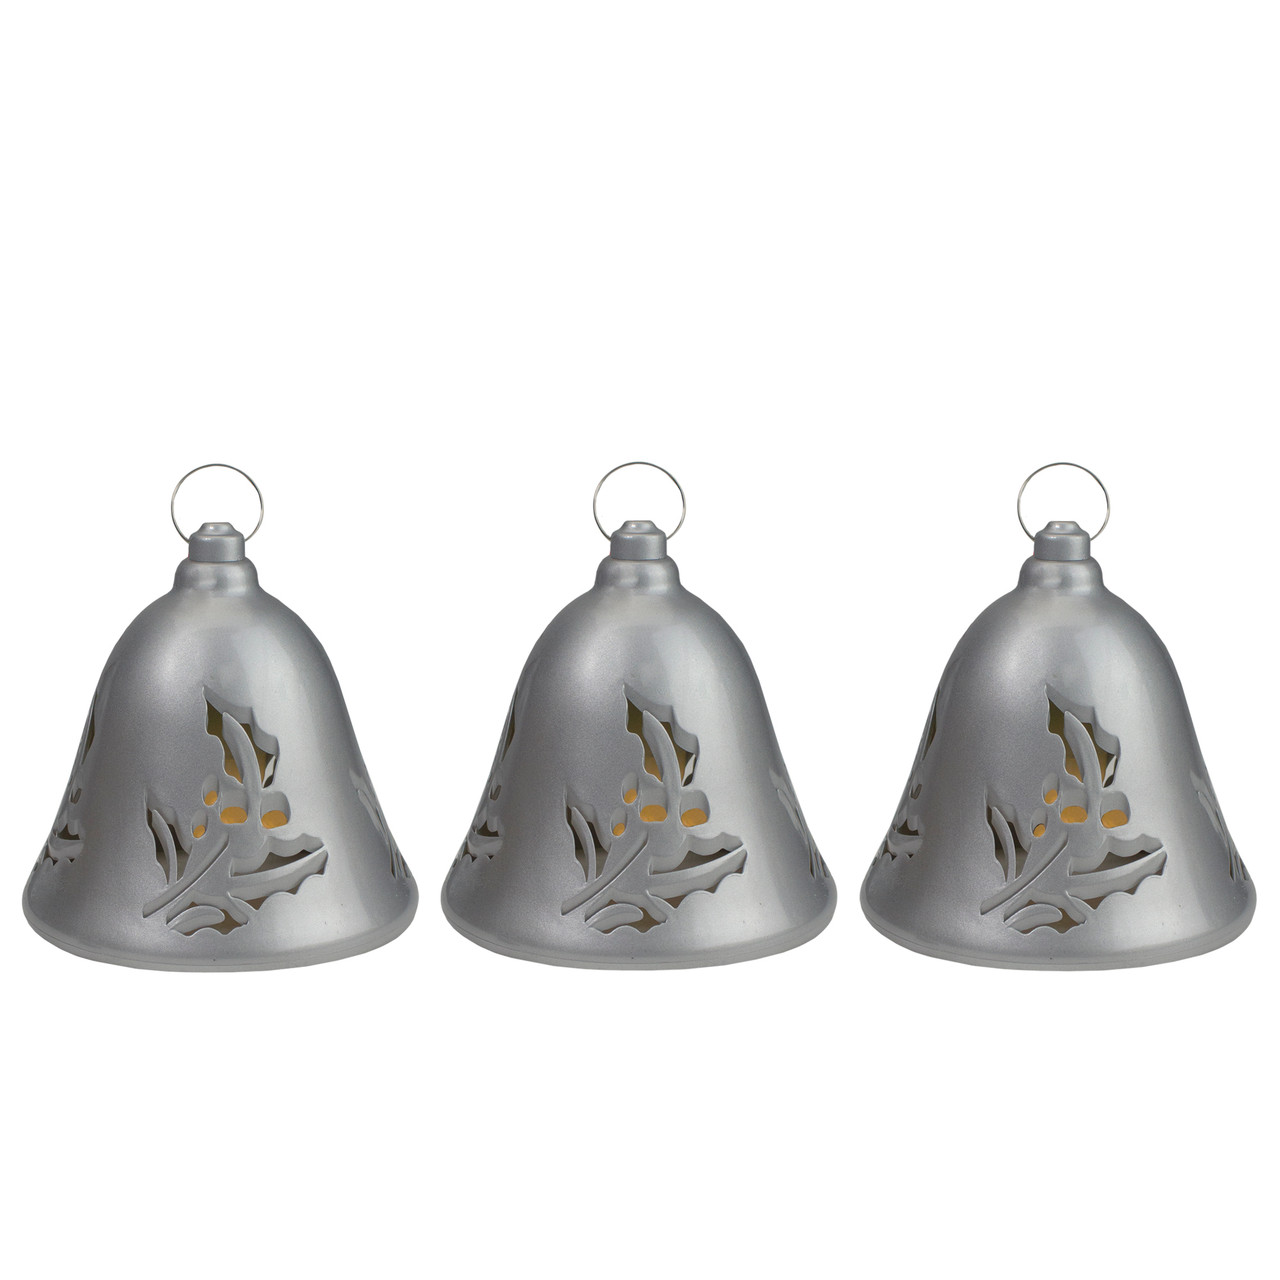 Metal Frosted Jingle Bell Necklaces